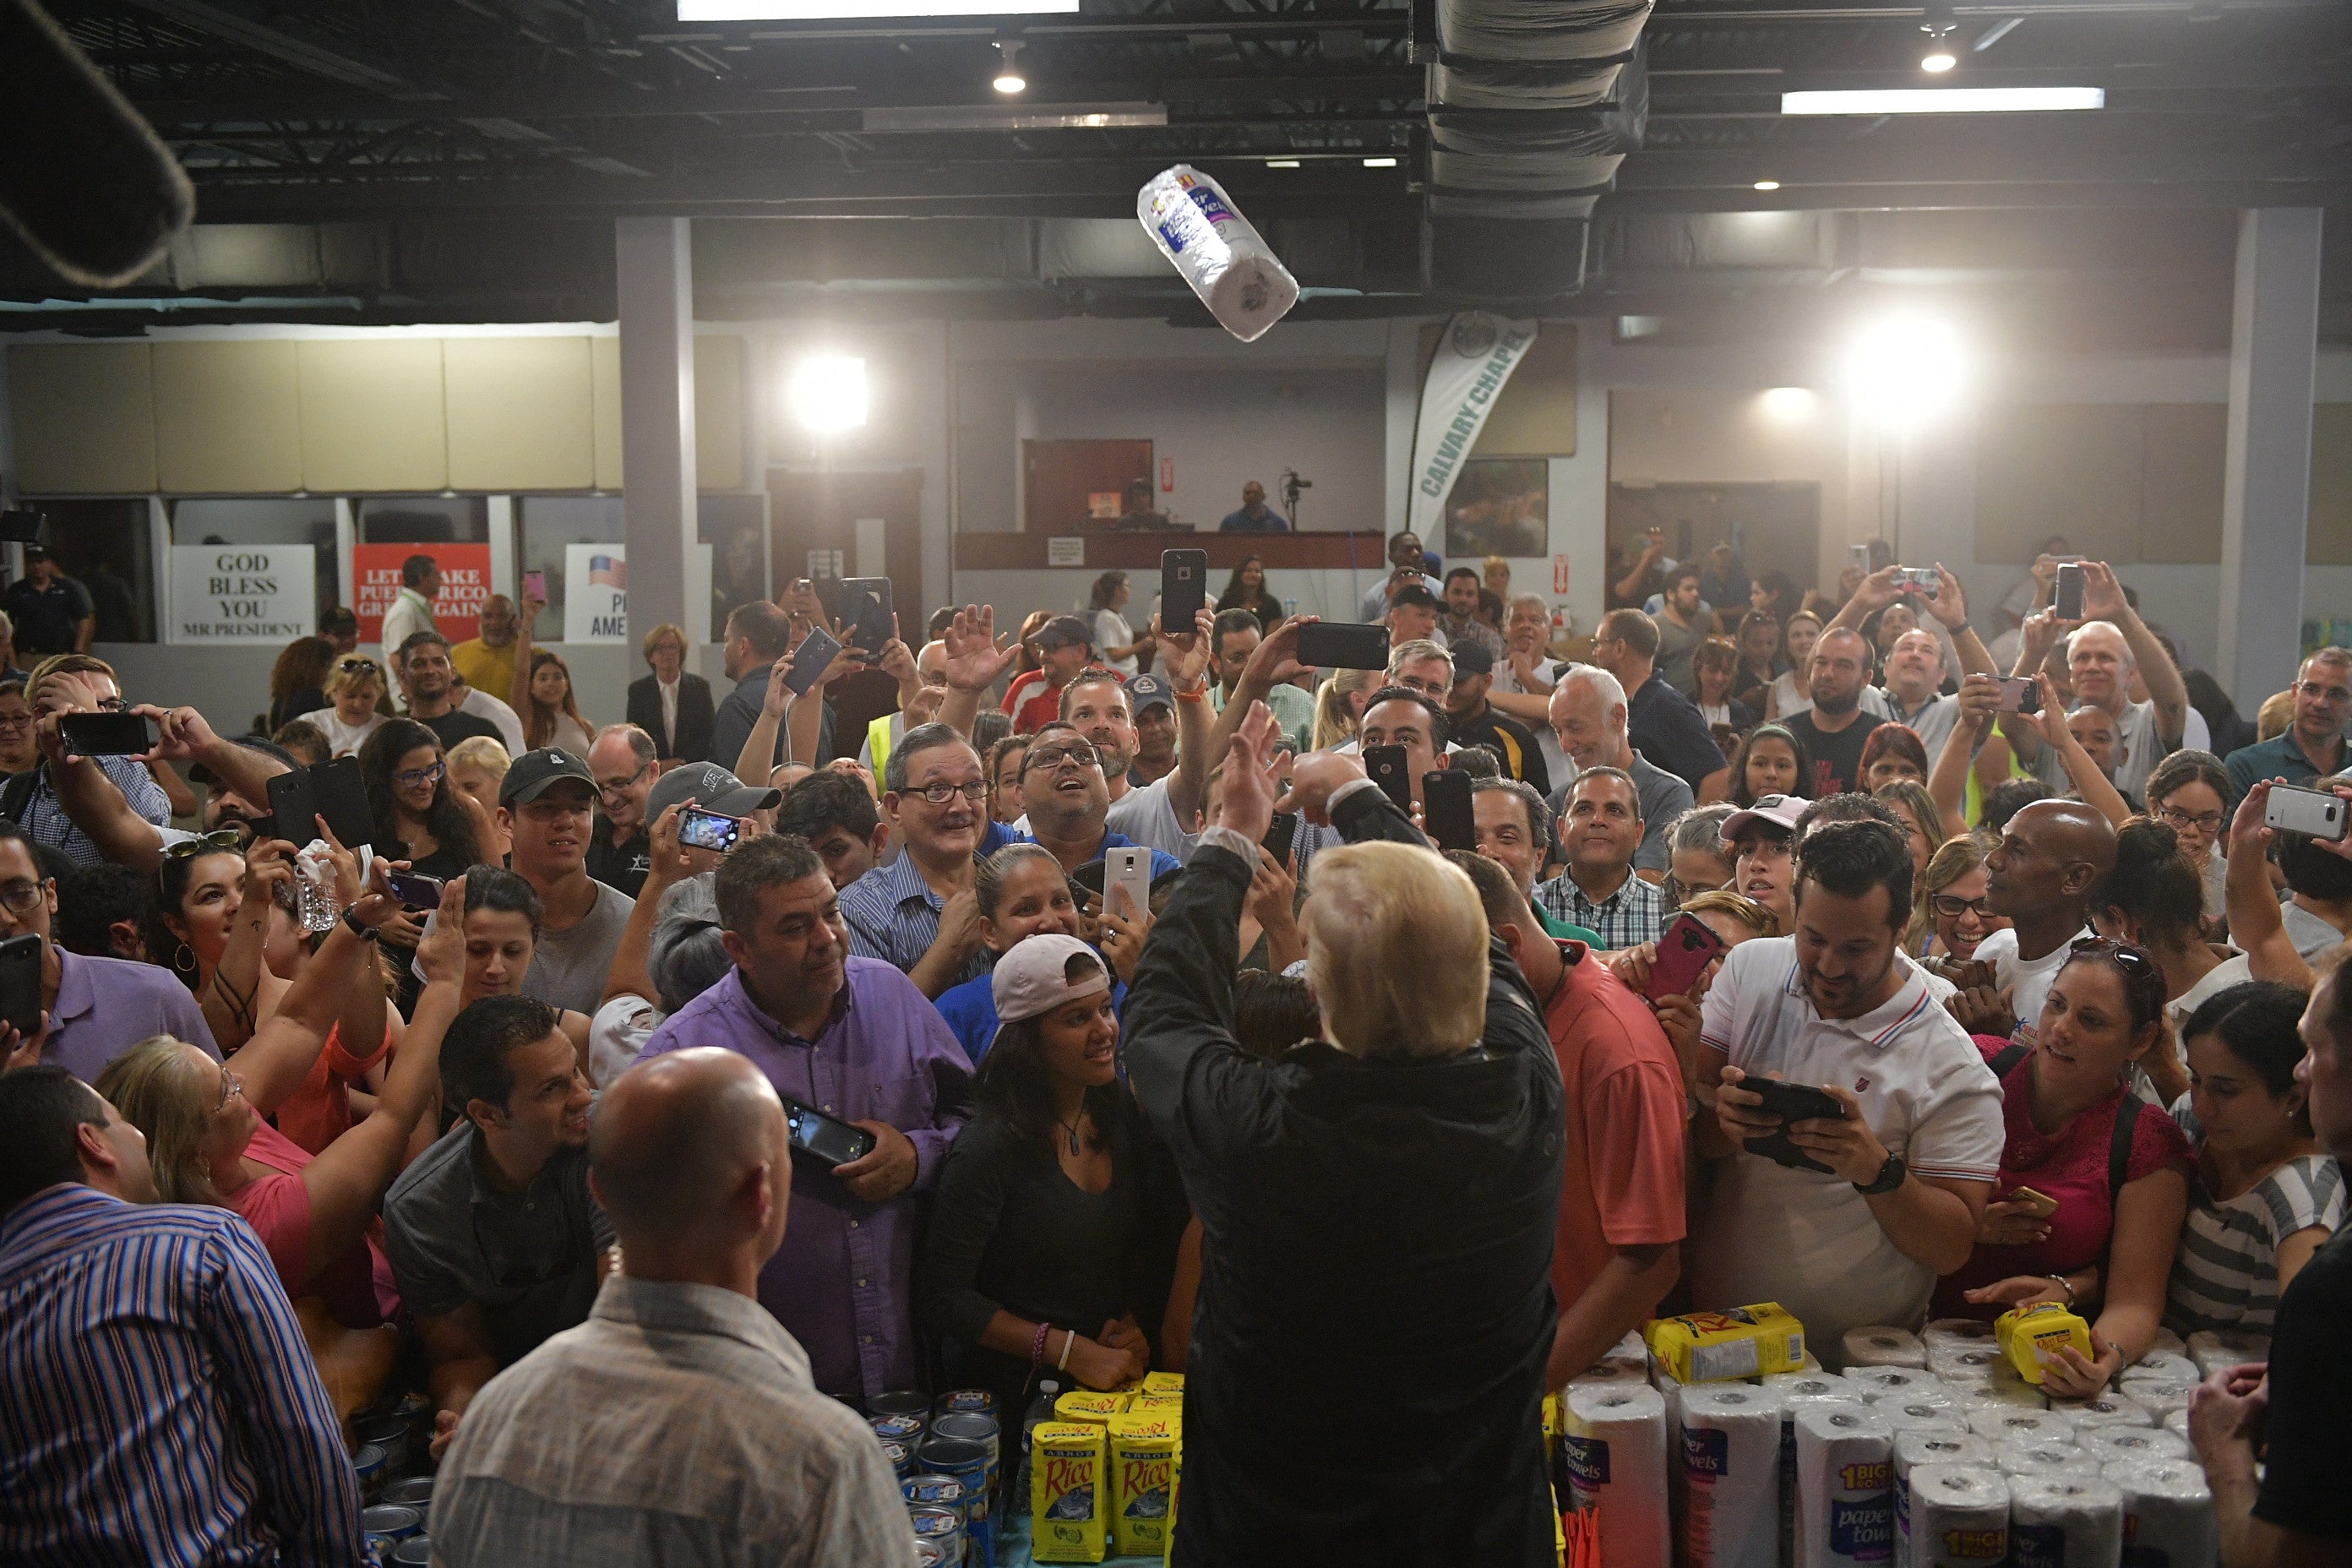 Trump threw rolls of paper towels into a crowd as he visited the Cavalry Chapel in Guaynabo, Puerto Rico on October 3, 2017